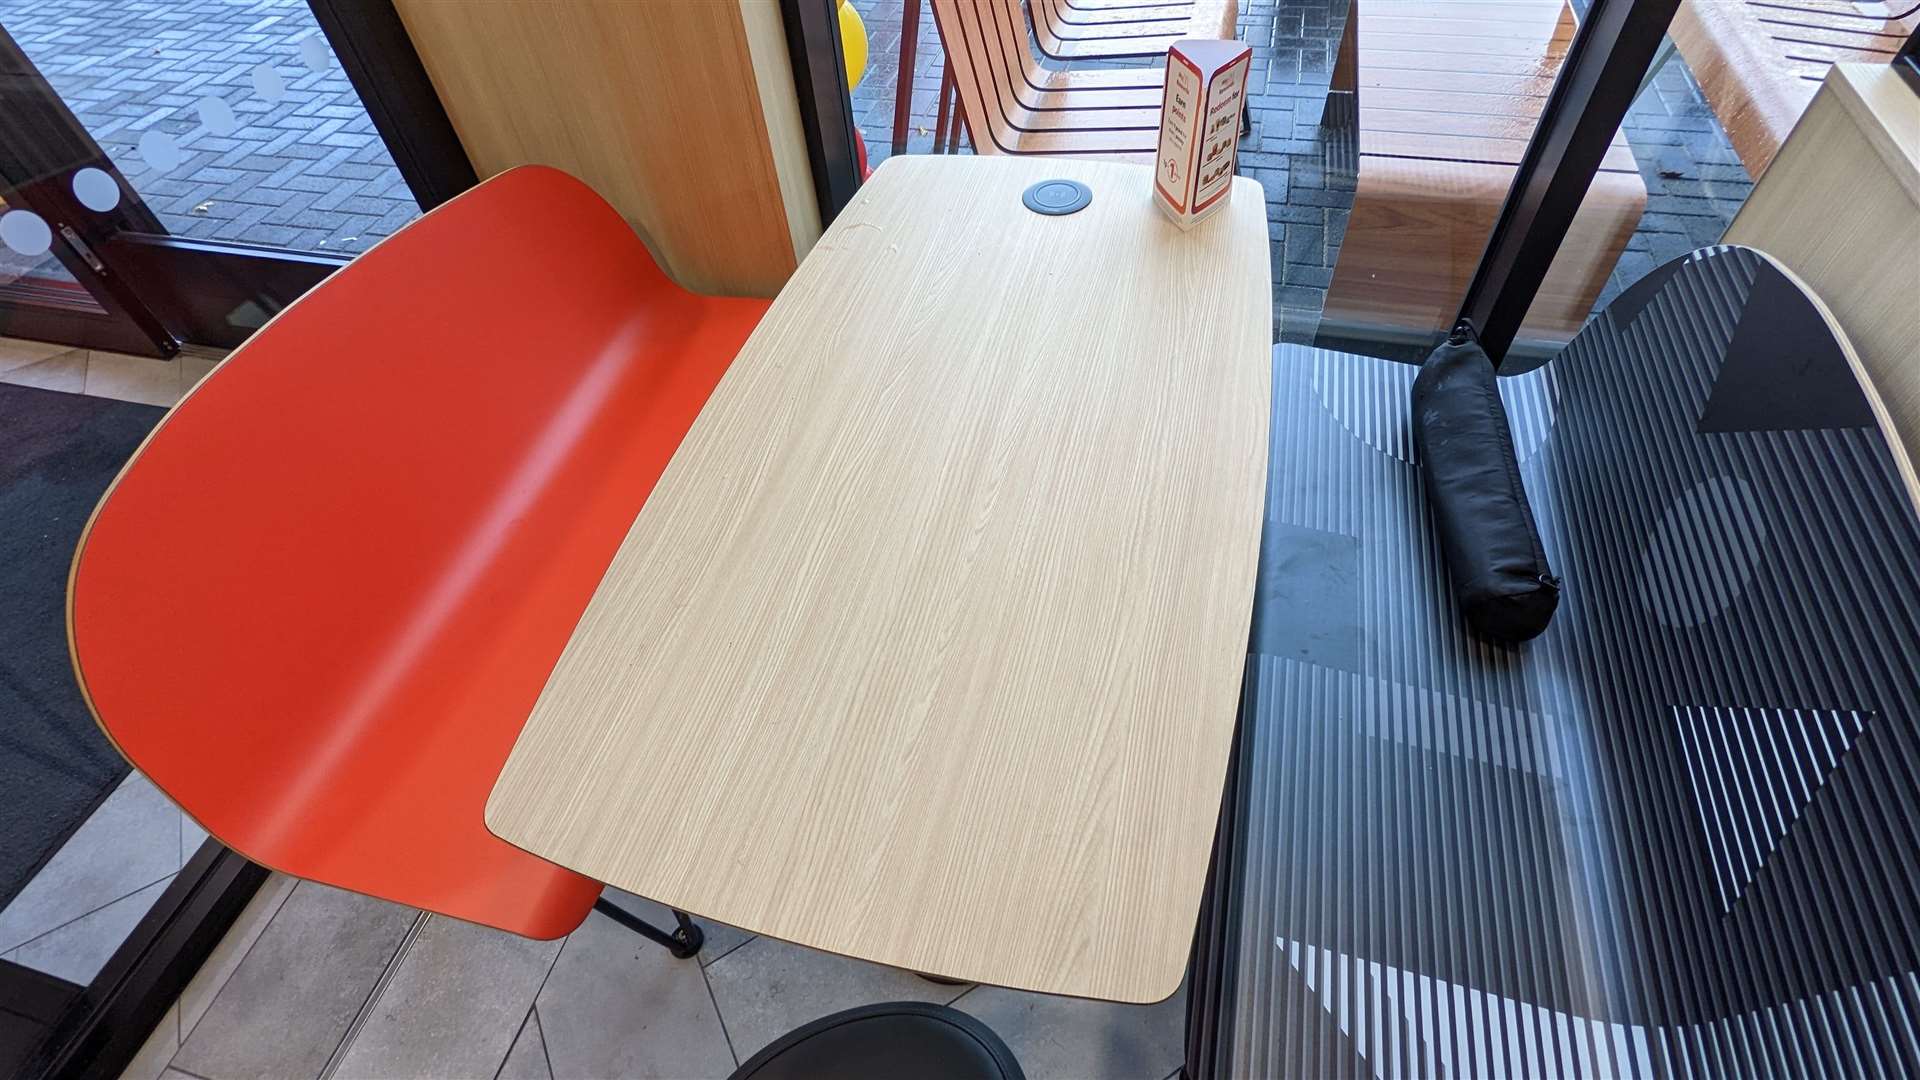 The table numbers hadn't been added yet when we dropped in to the new Folkestone McDonald's